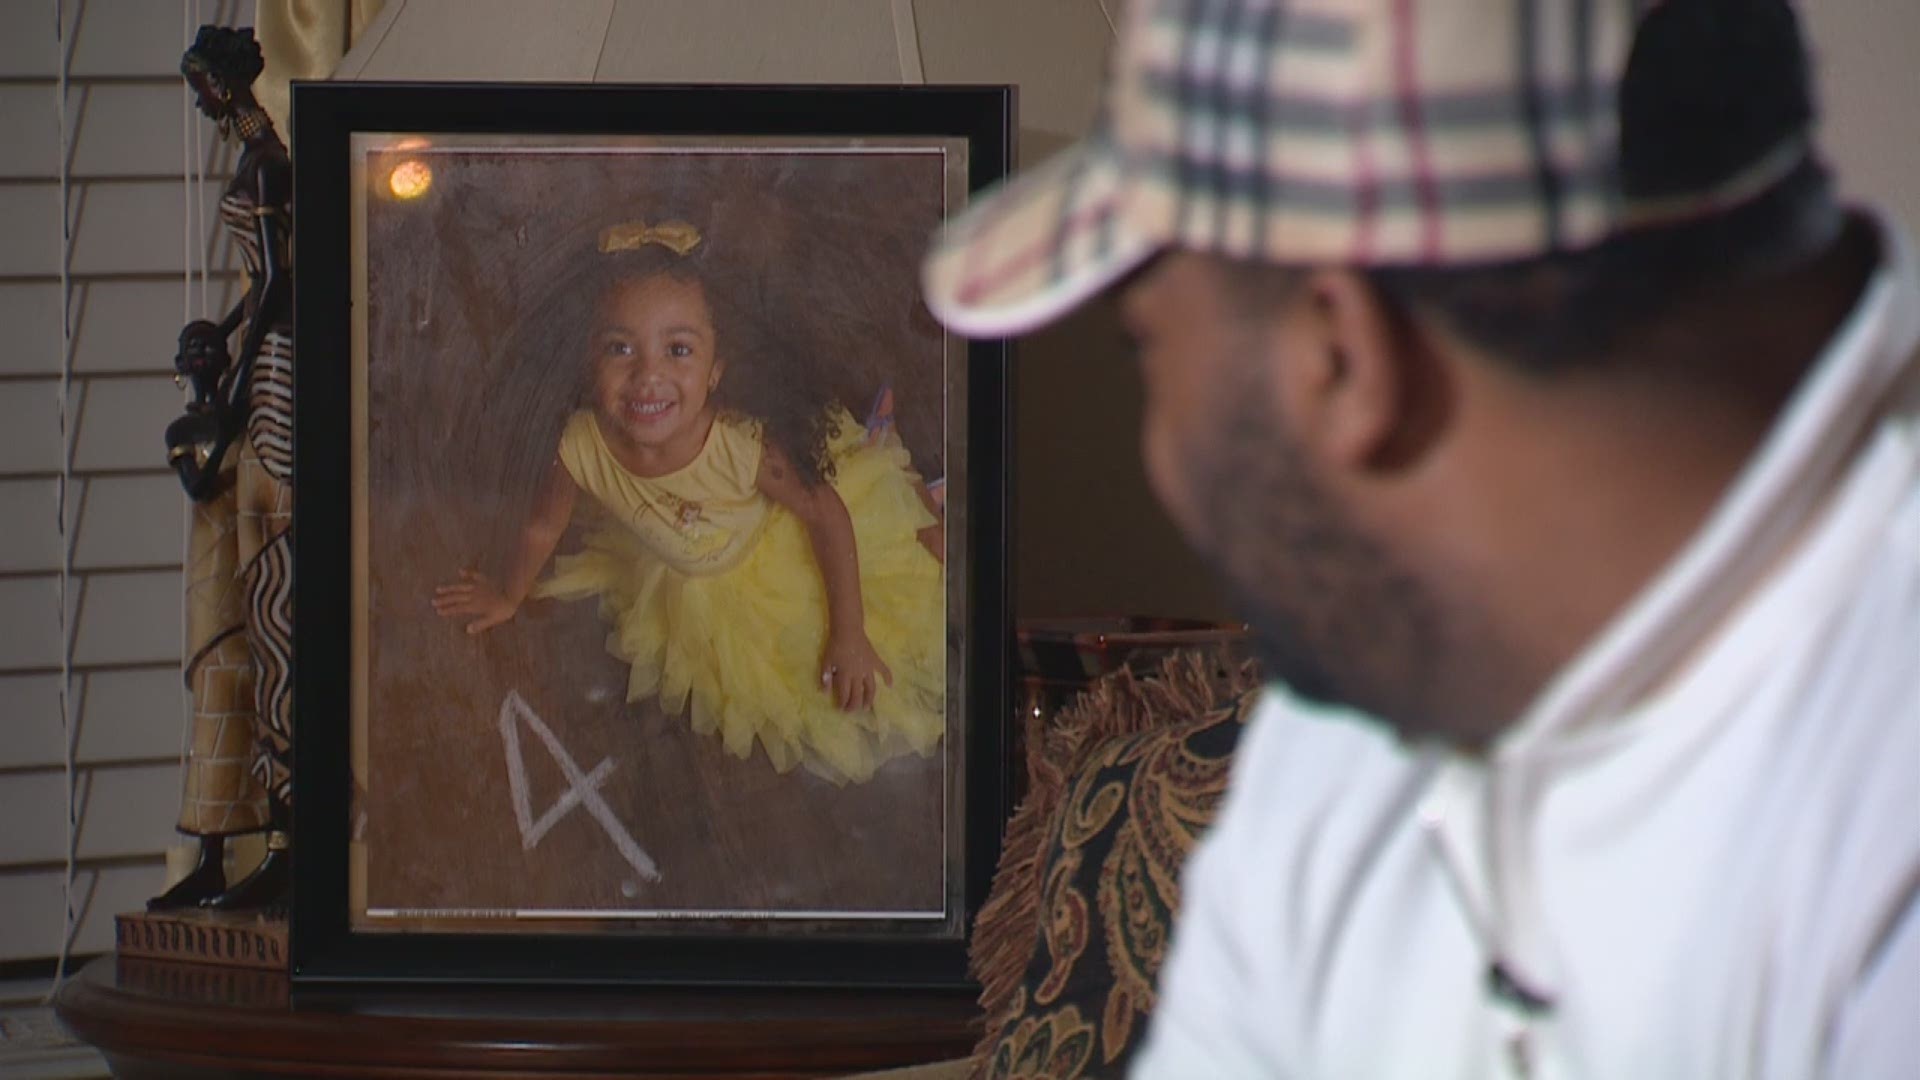 "I'm almost 30, and I'm about to bury my 4-year-old daughter," Ashanti Grinage's father said.